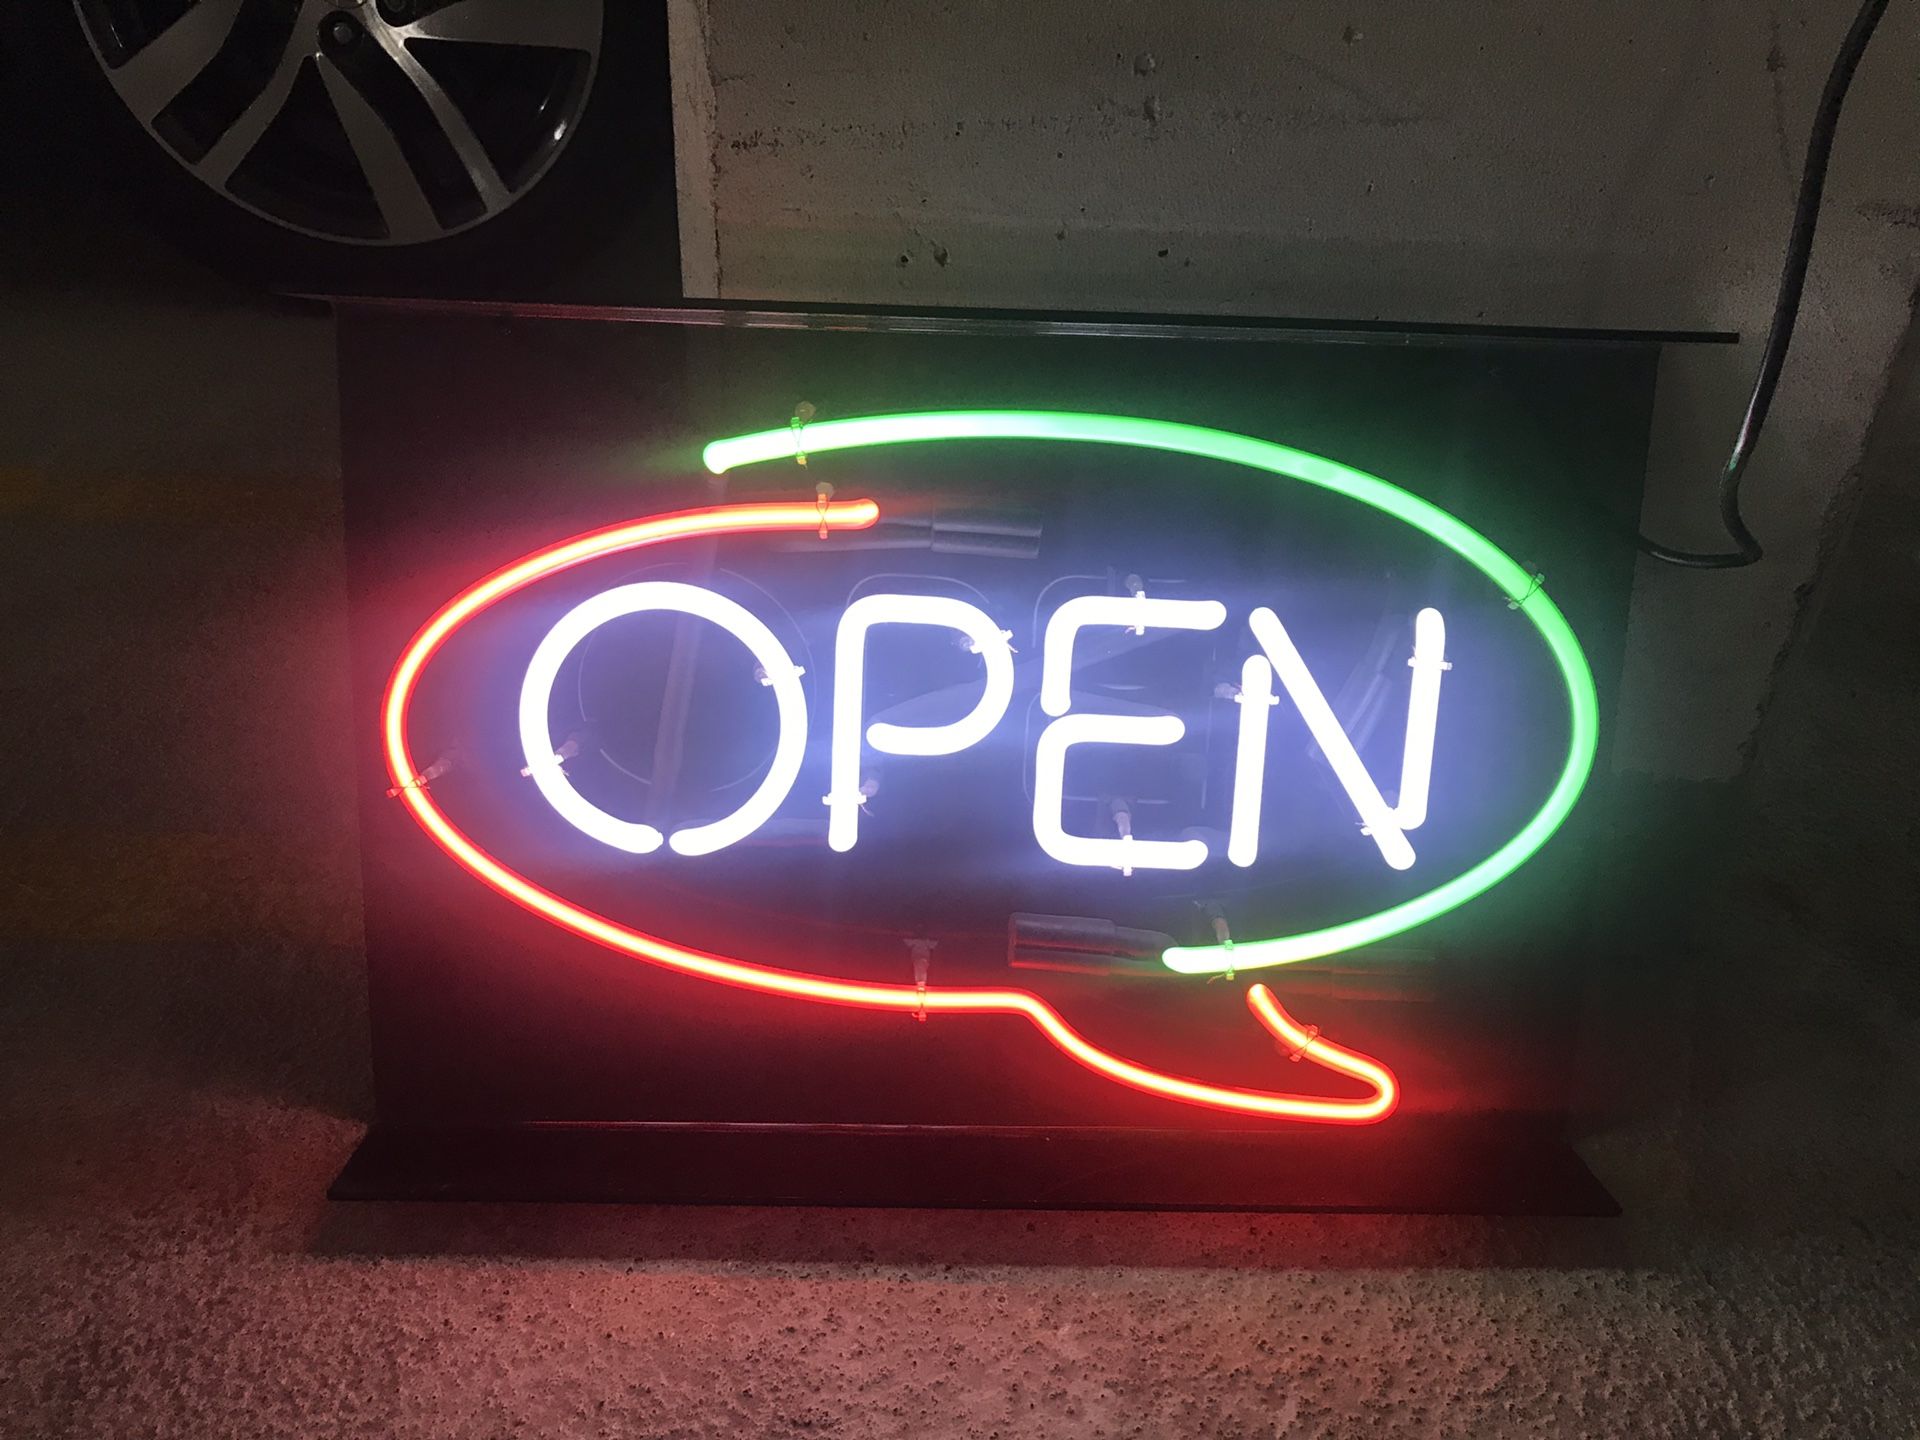 Open and order light signs make an offer